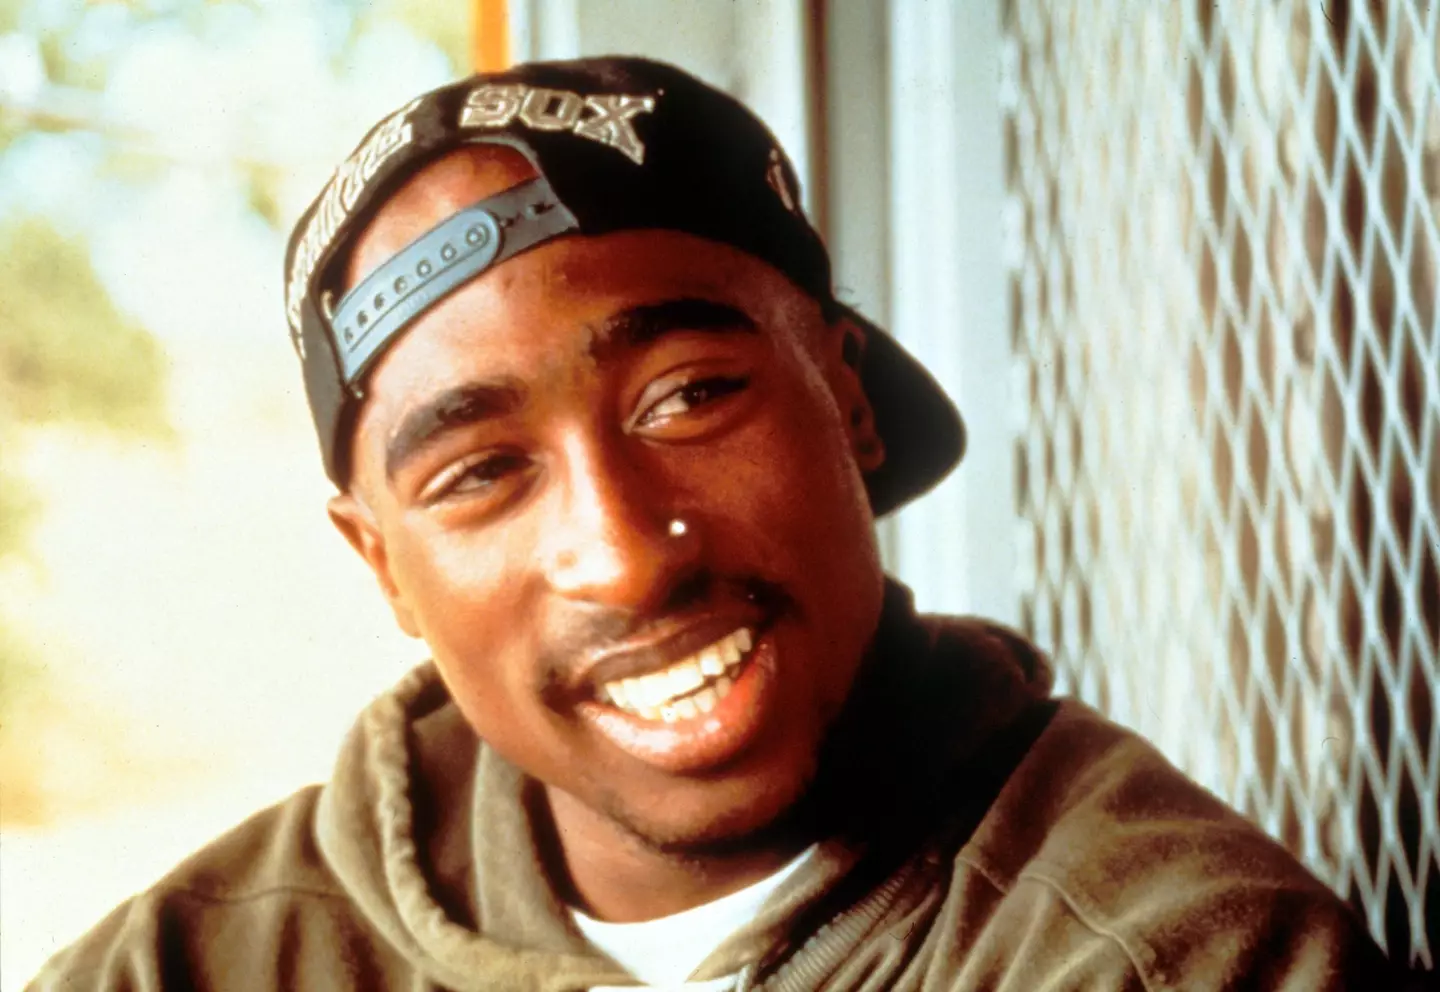 Tupac Shakur was killed after a shooting in 1996.